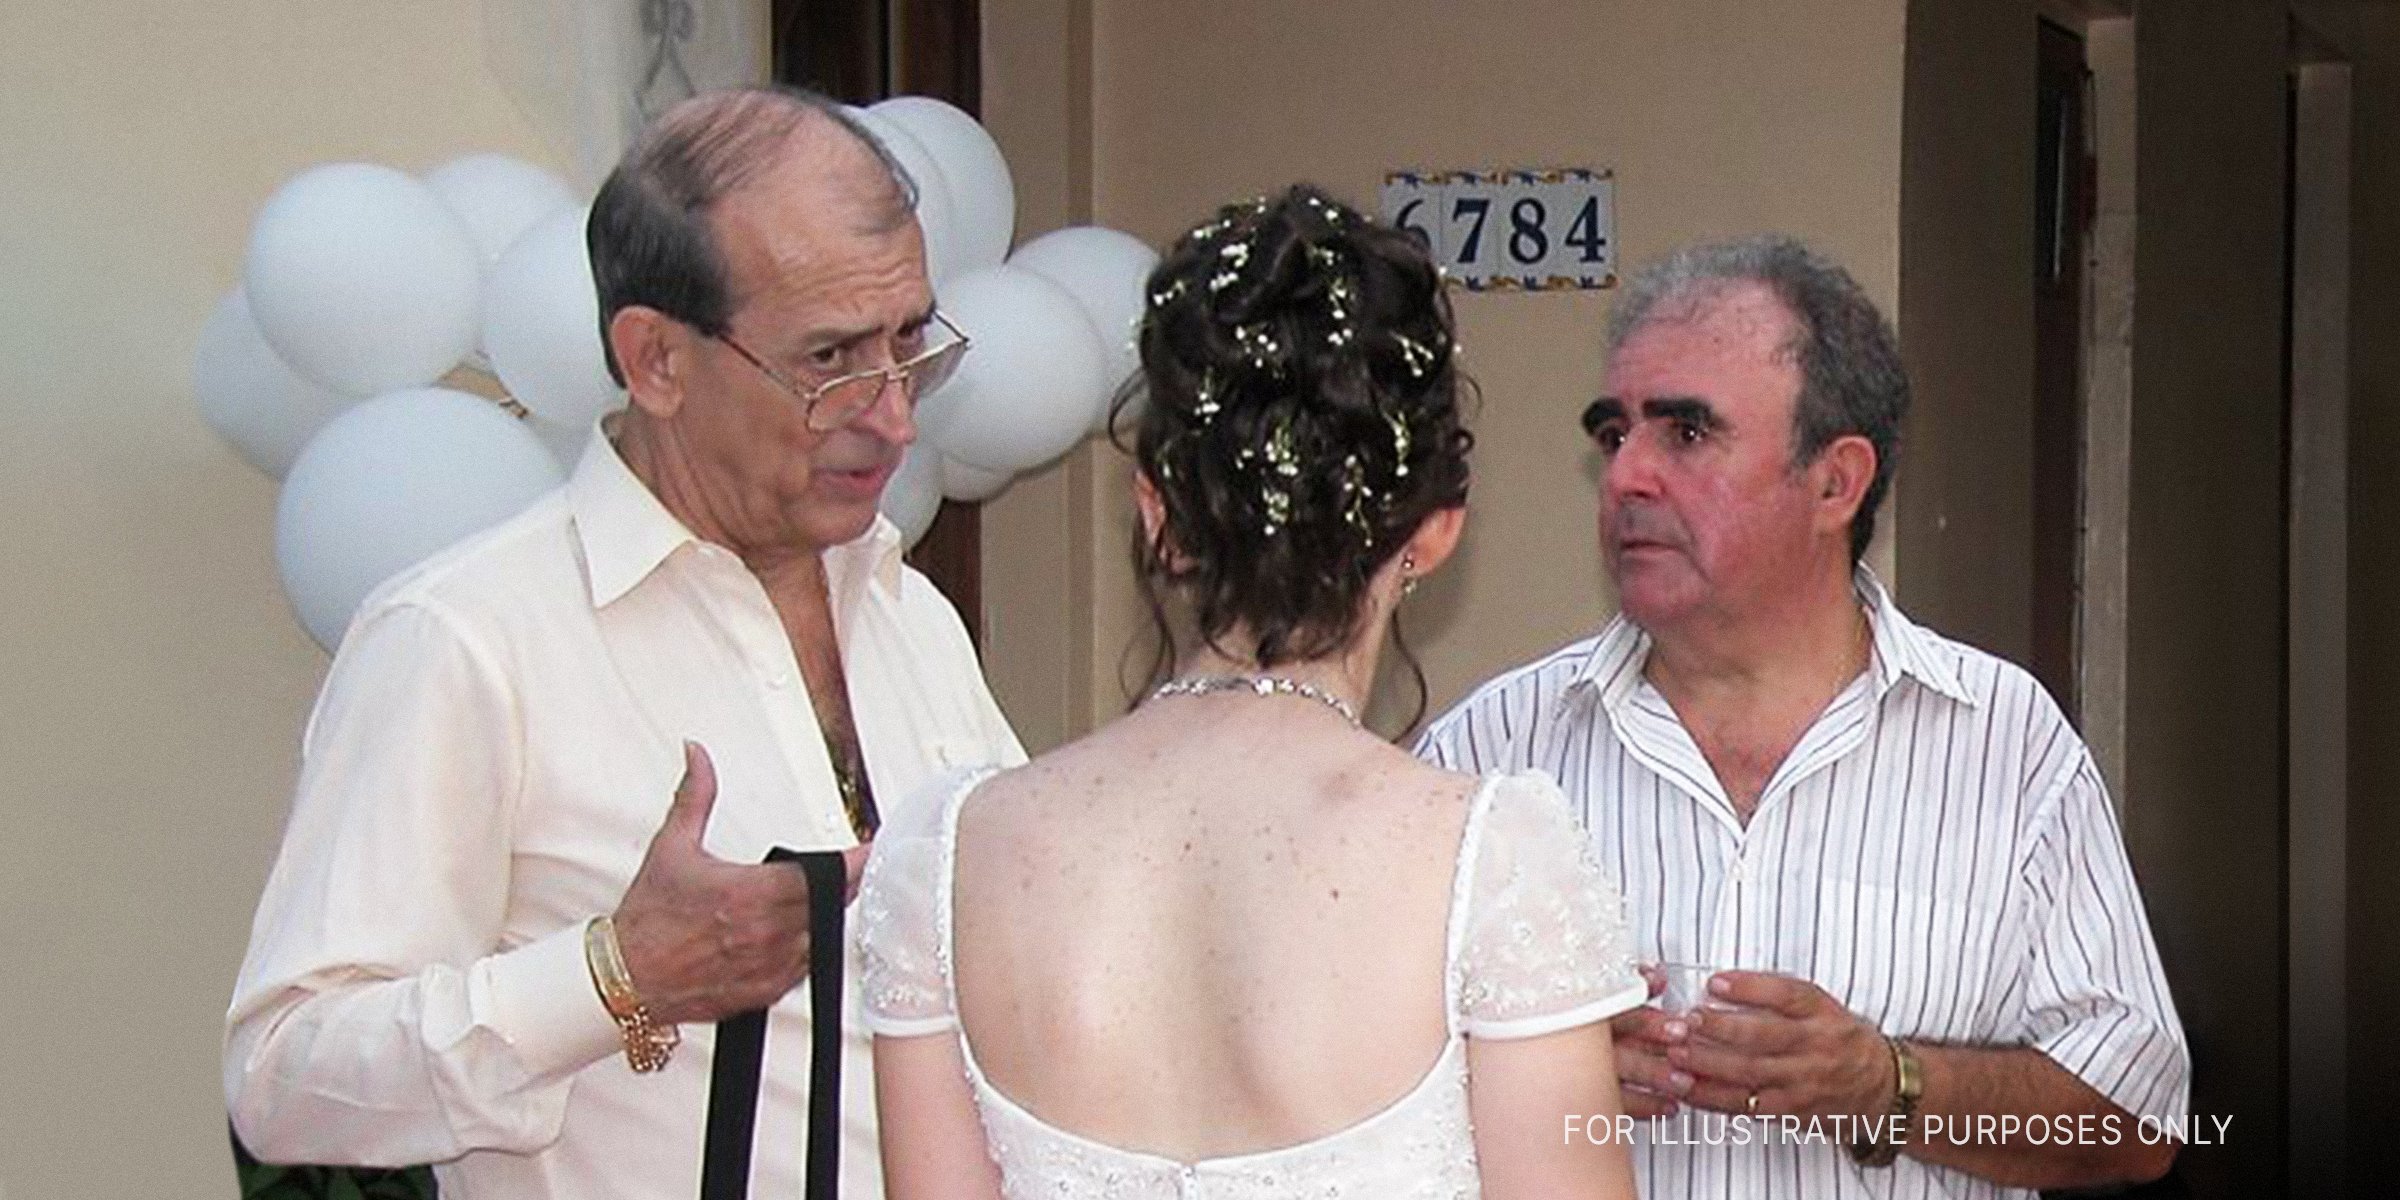 Two serious men in conversation with a bride | Source: Flickr / fer320 (CC BY 2.0)